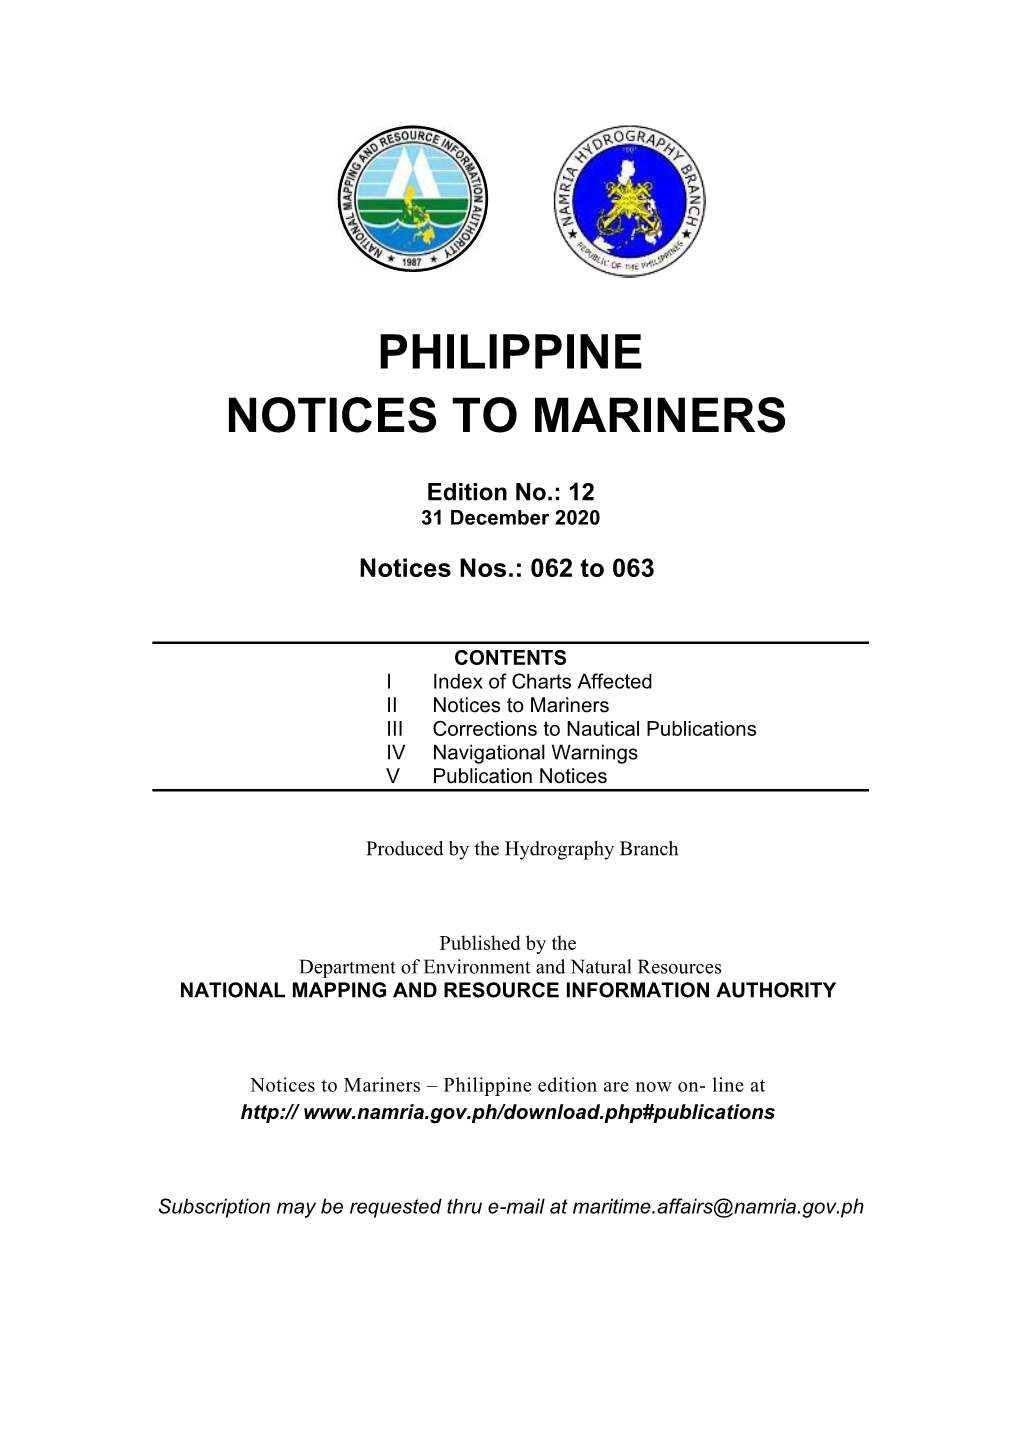 Philippine Notice to Mariners December 2020 Edition